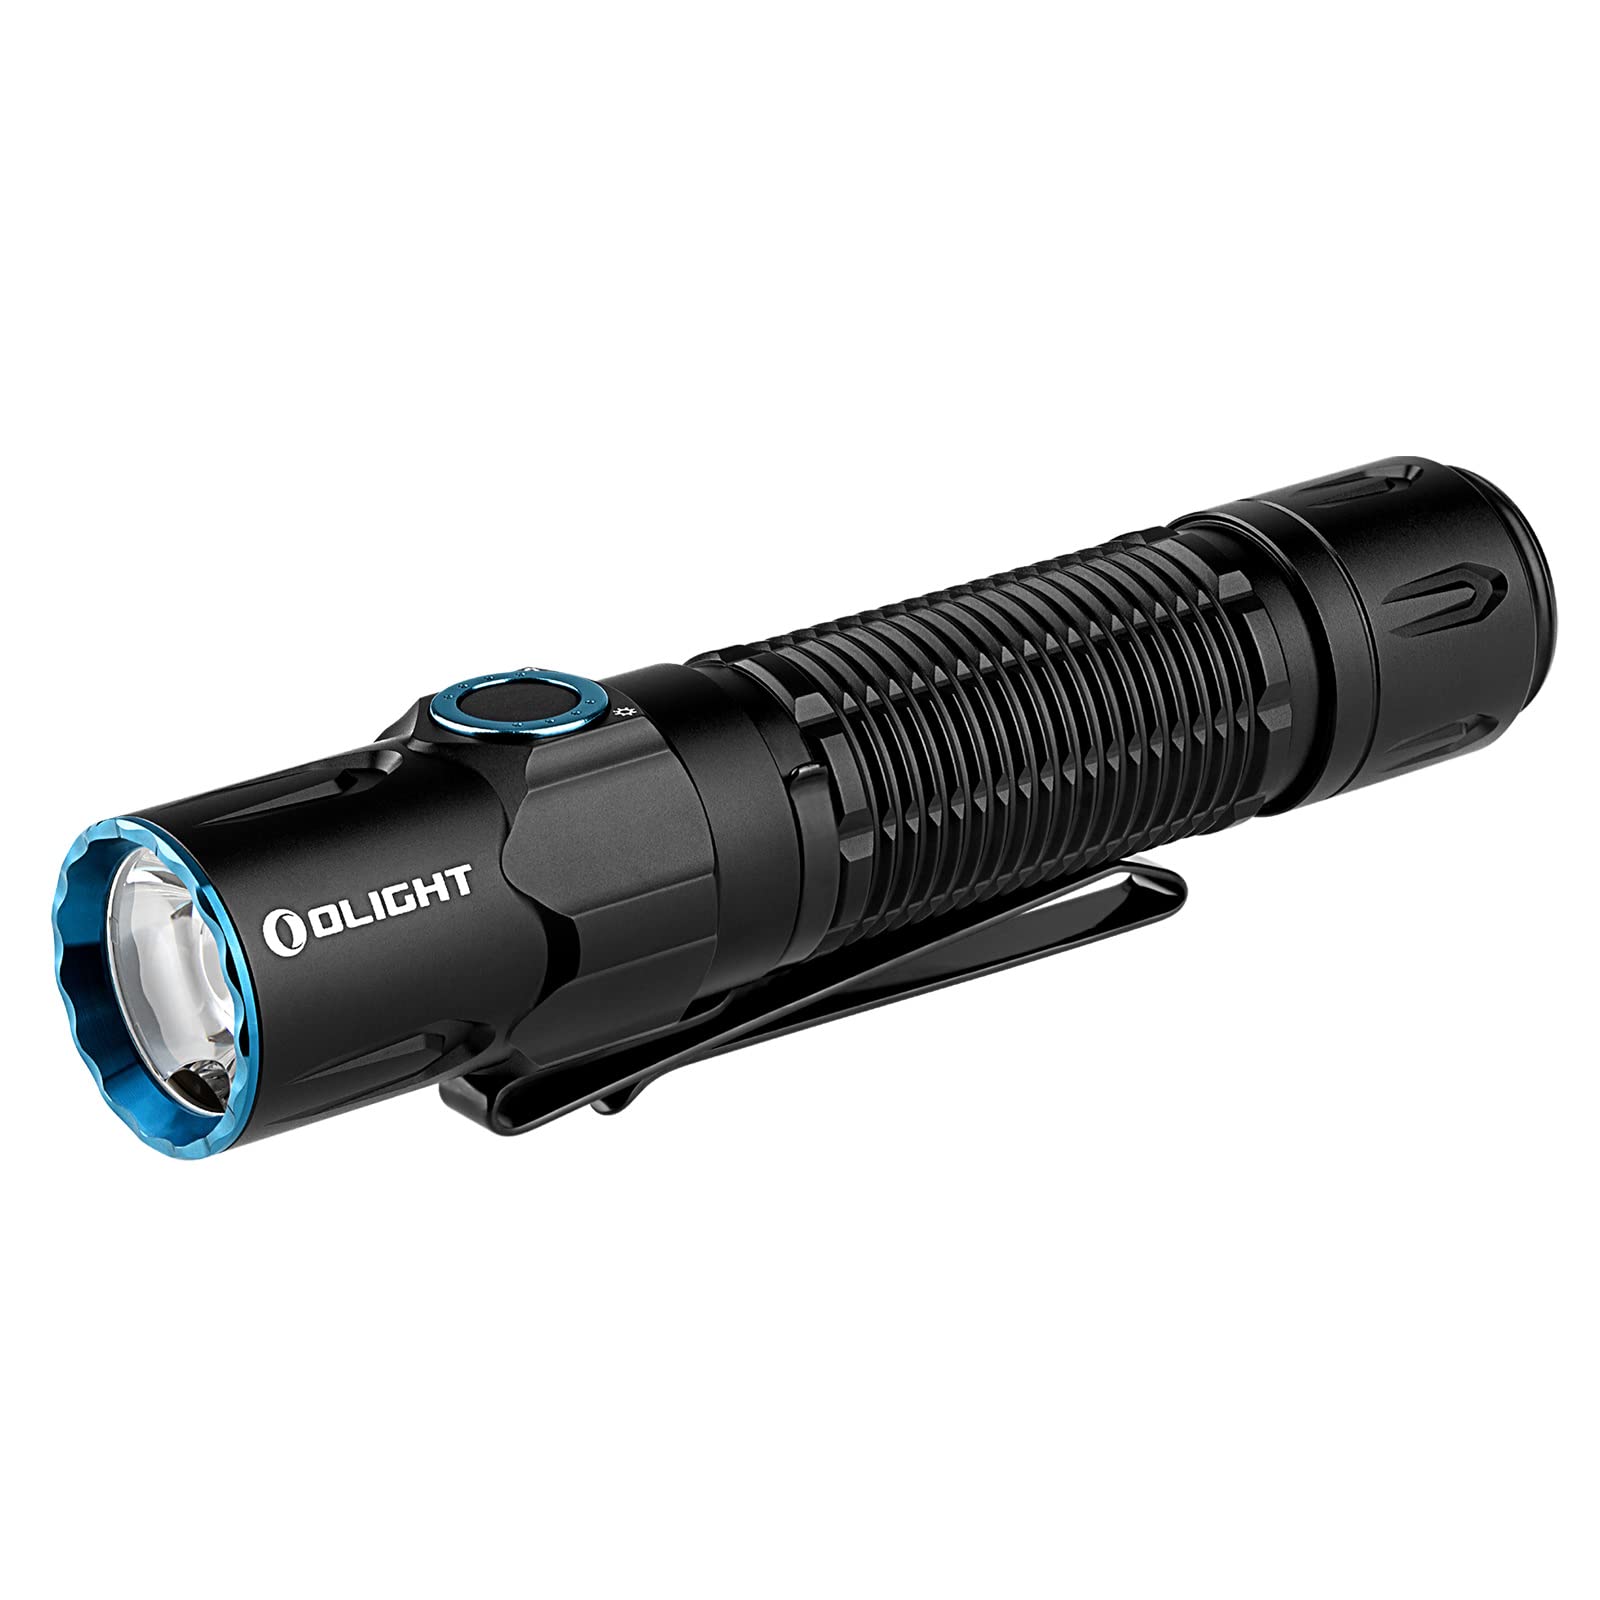 Olight Warrior 3S 2300 Lumens Rechargeable Tactical Flashlight, Compact Dual-Switches LED Bright Light with Proximity Sensor, ...